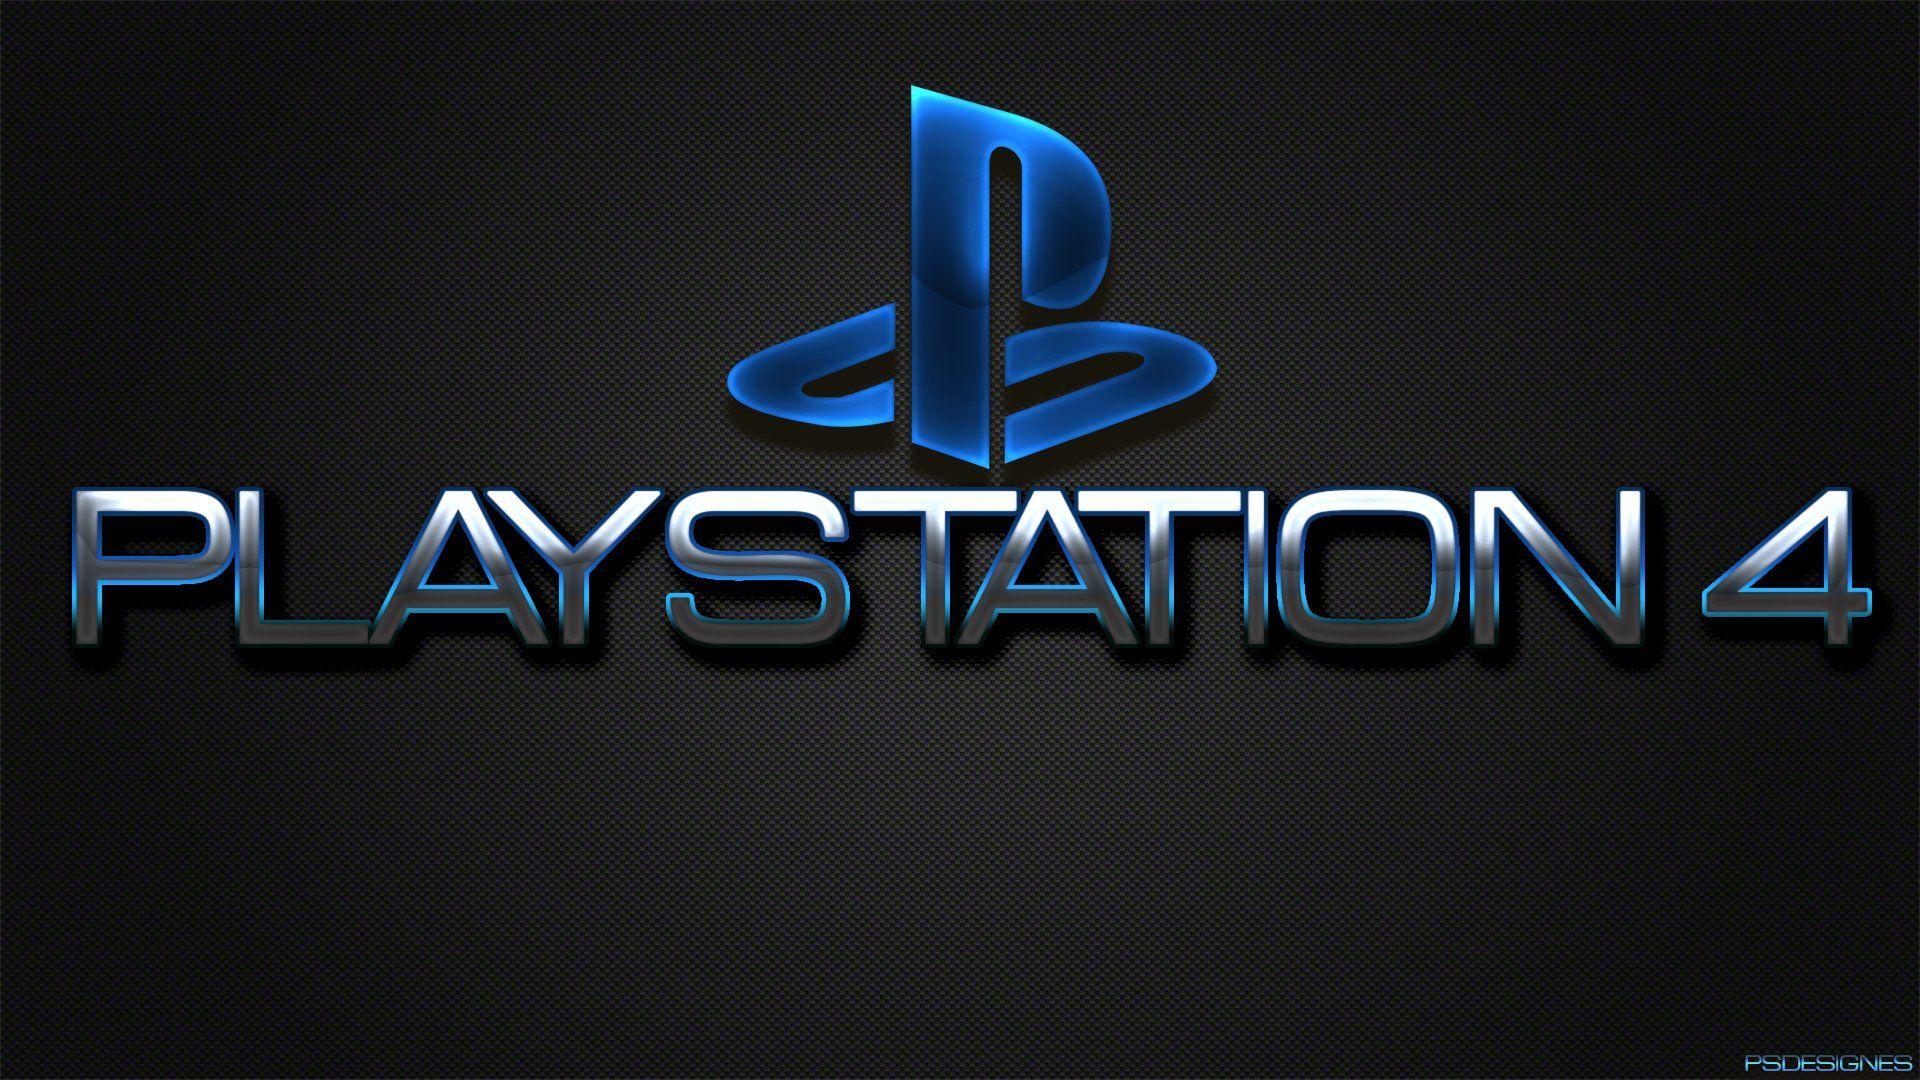 PS4 PlayStation 4 Logo - Sony PlayStation 4 Wallpaper, Picture, Image